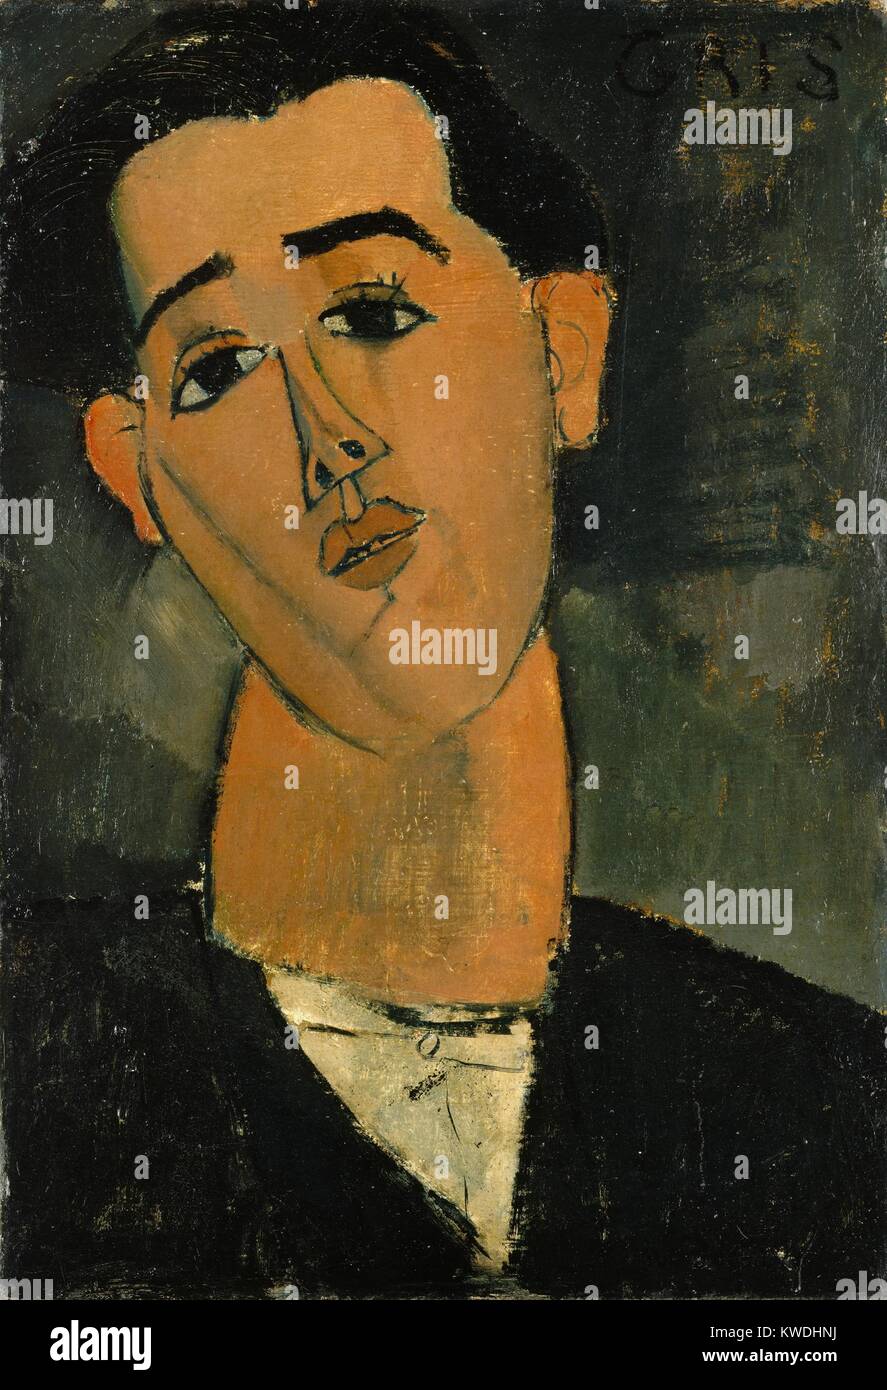 JUAN GRIS, by Amedeo Modigliani, 1915, Italian modernist painting, oil on canvas. Portrait of Spanish Cubist painter was made in Paris during WW1, after Modigliani, turned to painting due to wartime shortage of sculpture stone (BSLOC 2017 7 10) Stock Photo